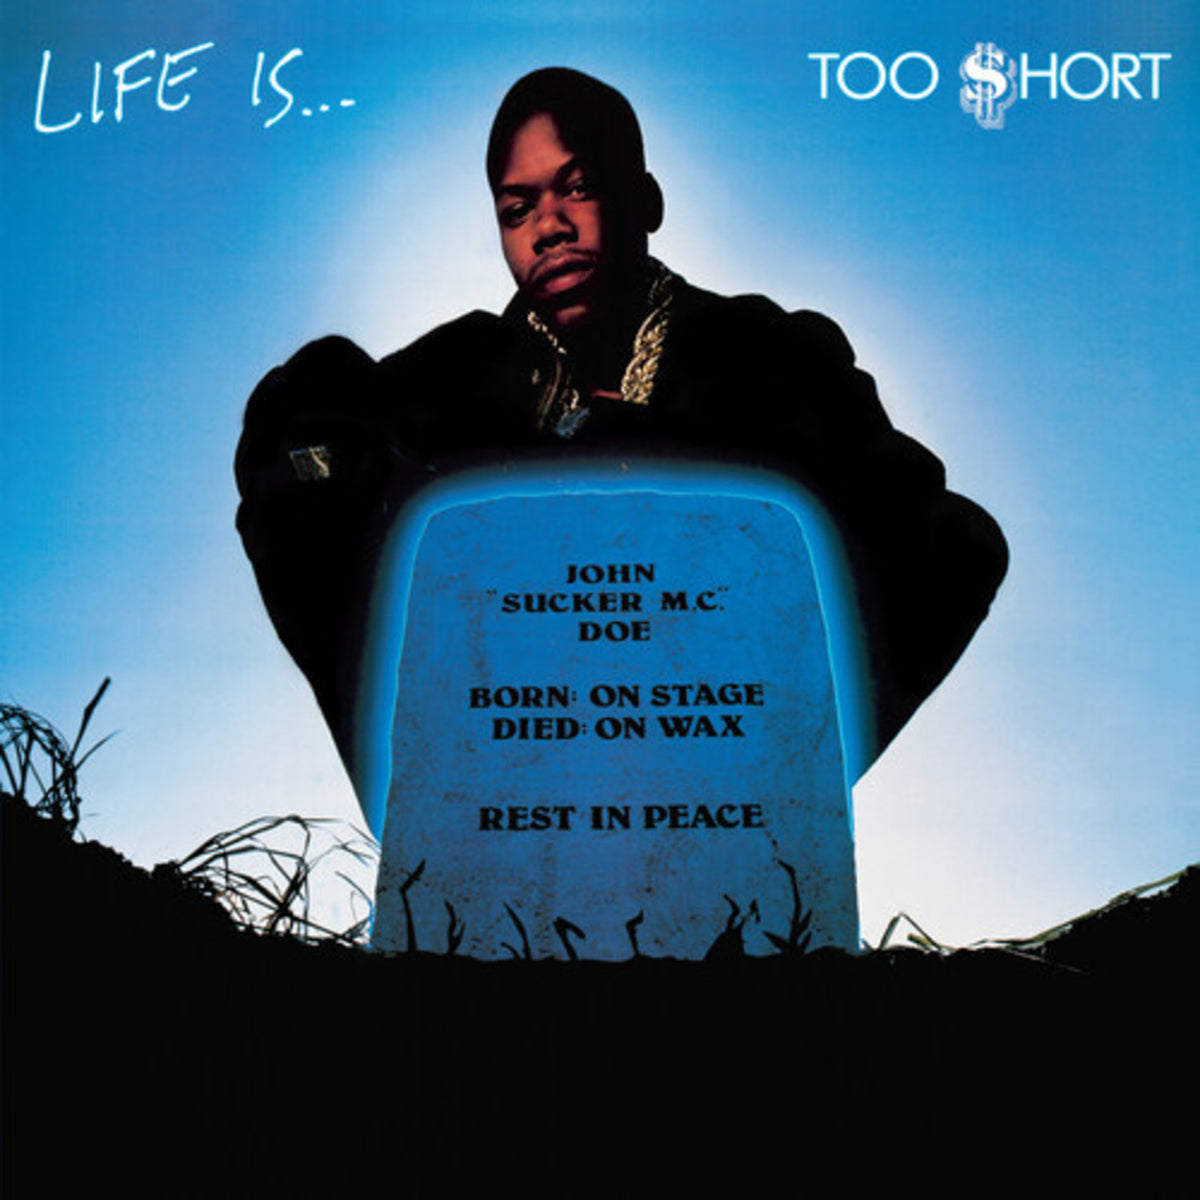 Too $hort - Life is... Too $hort